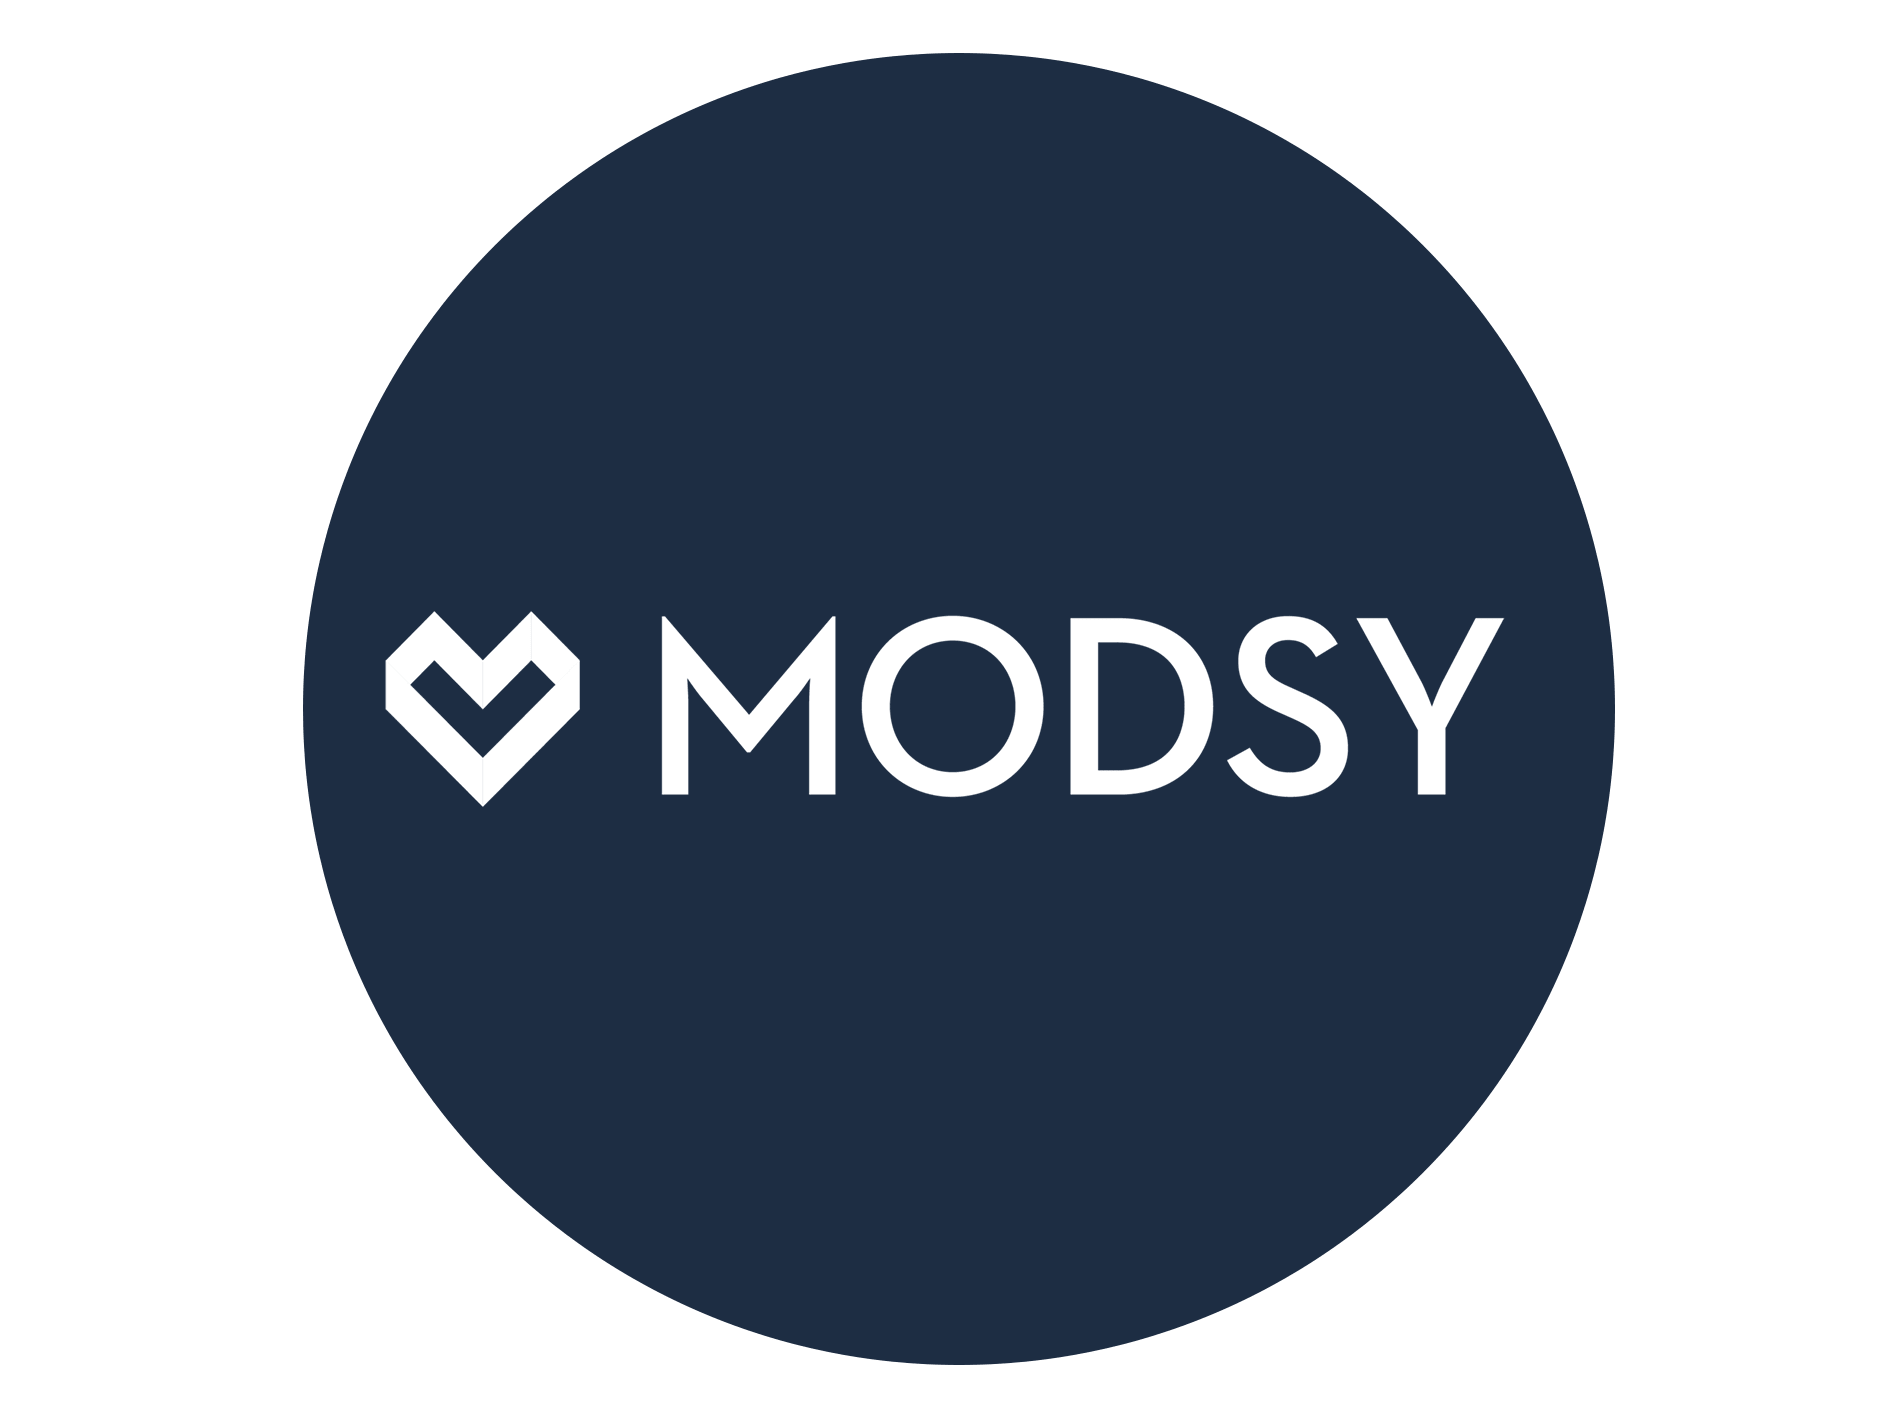 modsy logo for OOH advertising